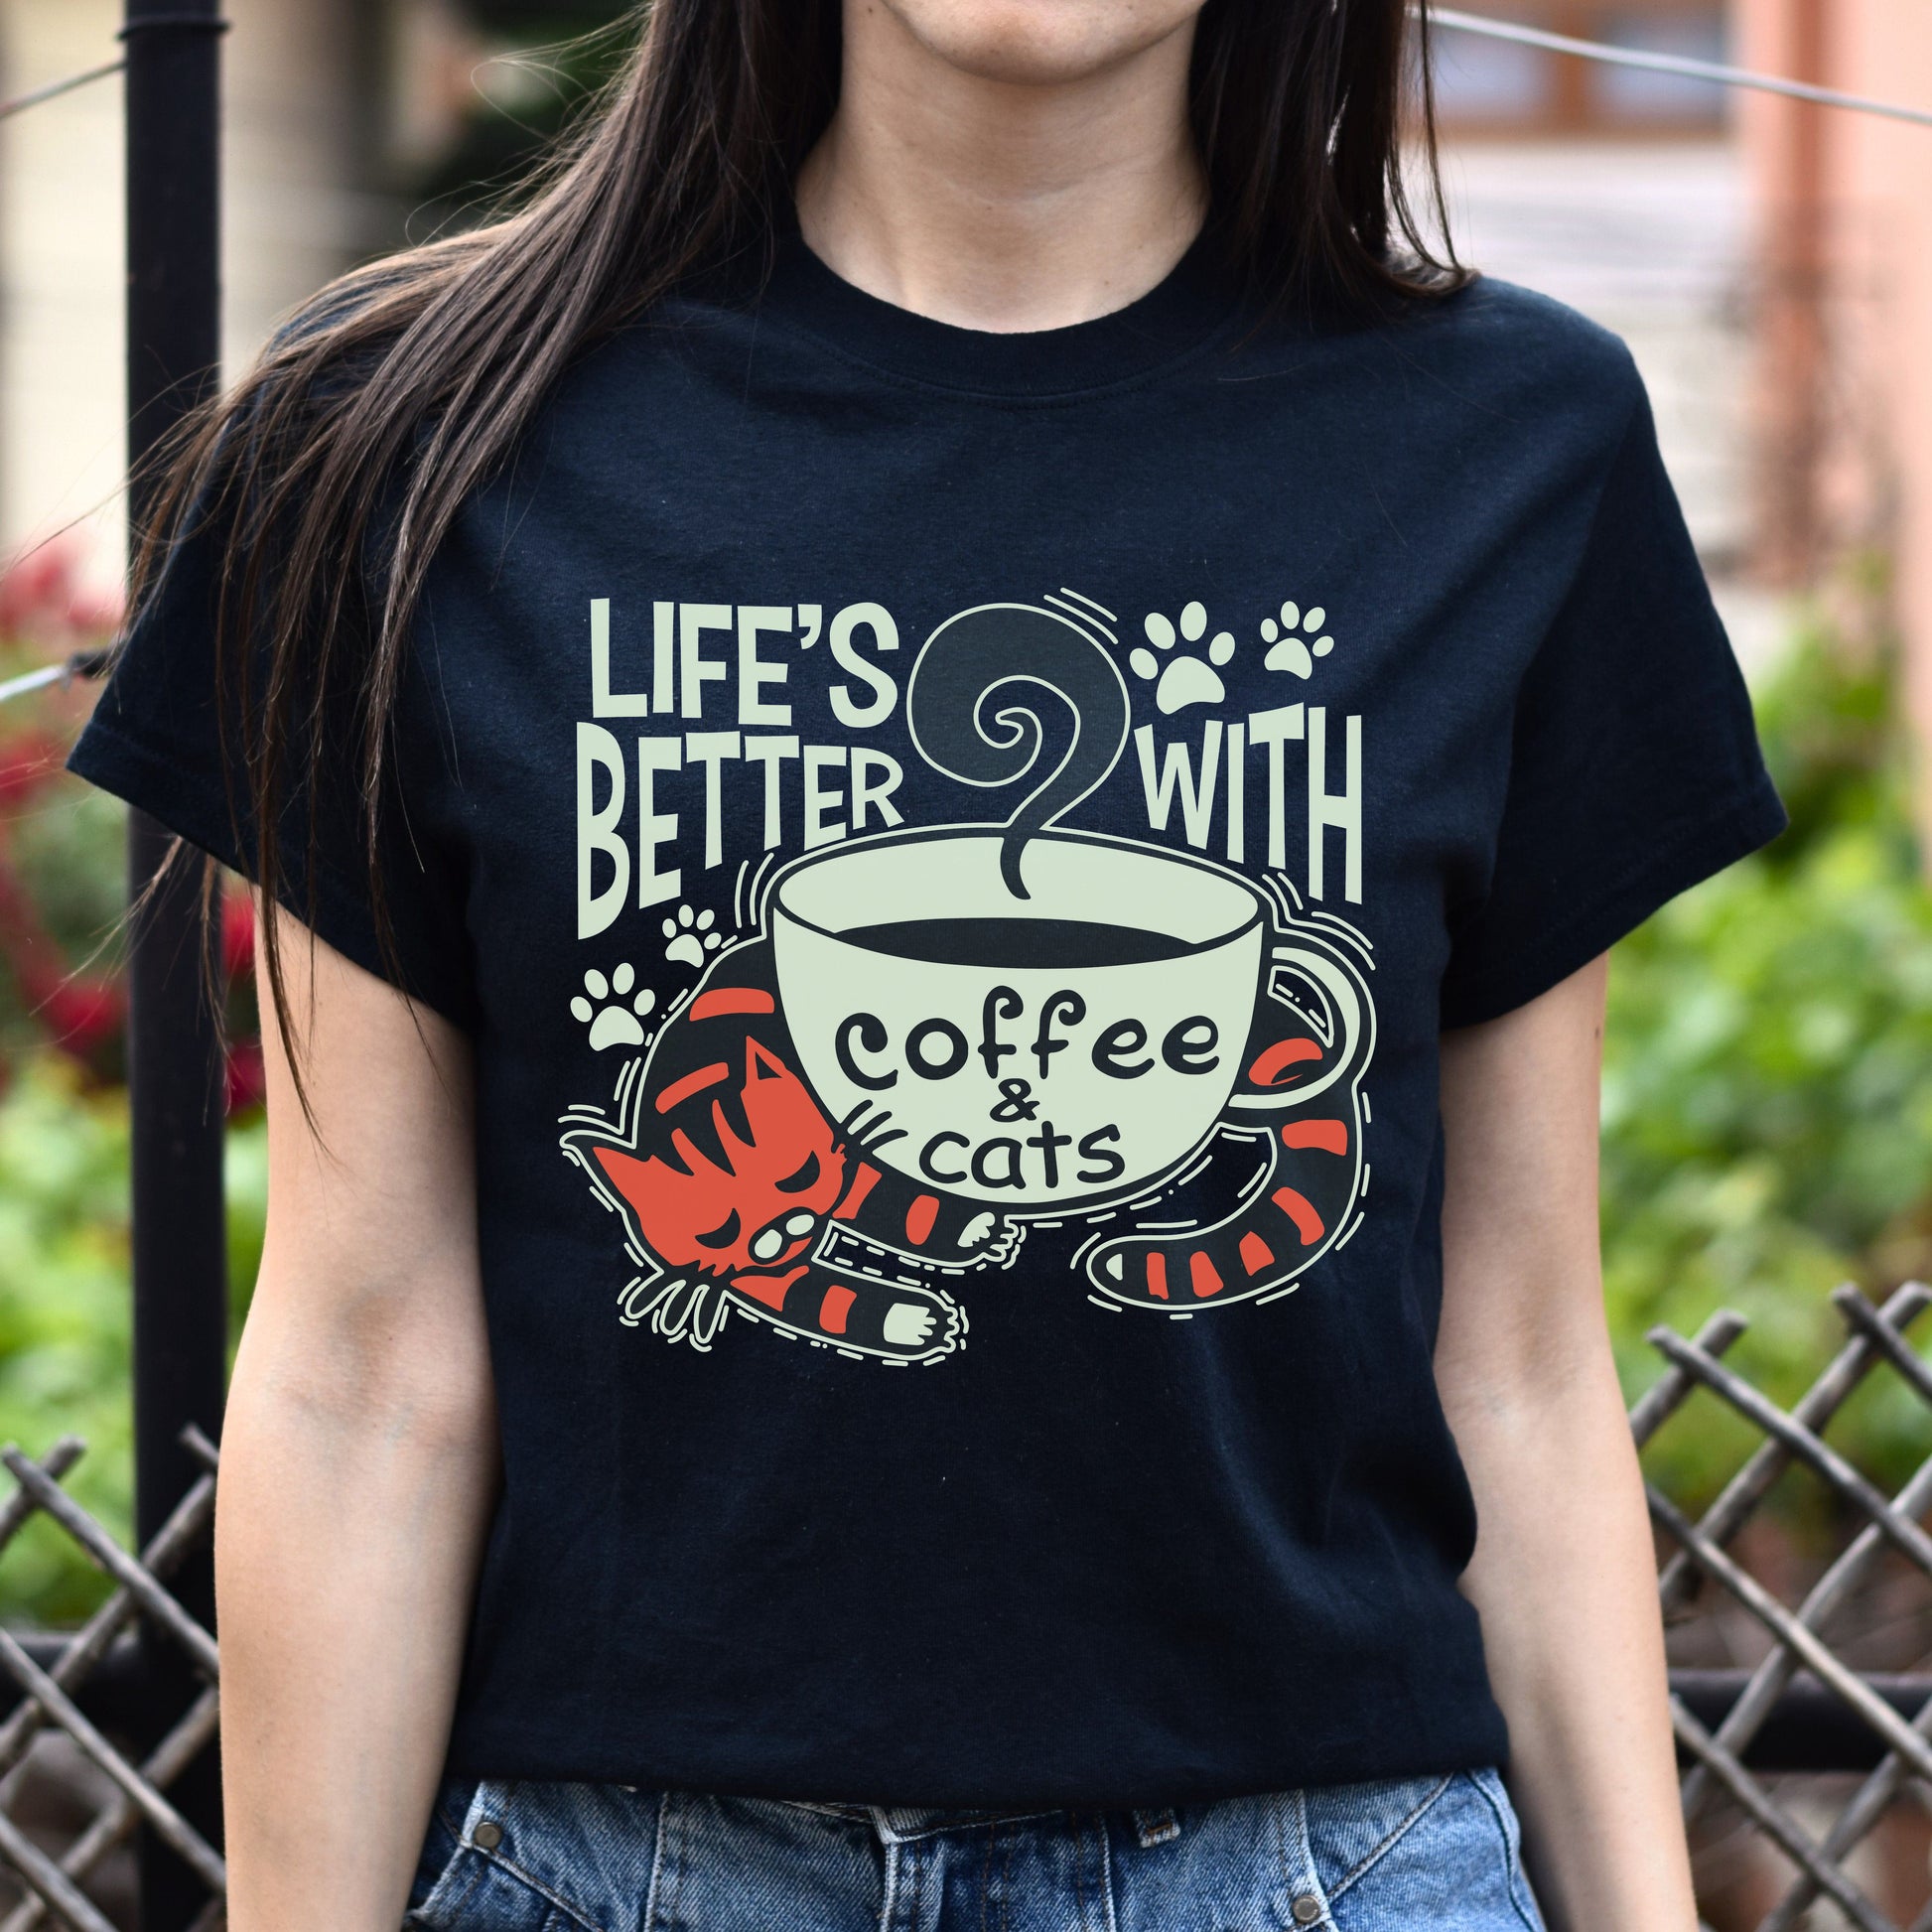 Life is better with coffee and cats Unisex shirt Black Dark Heather-Family-Gift-Planet